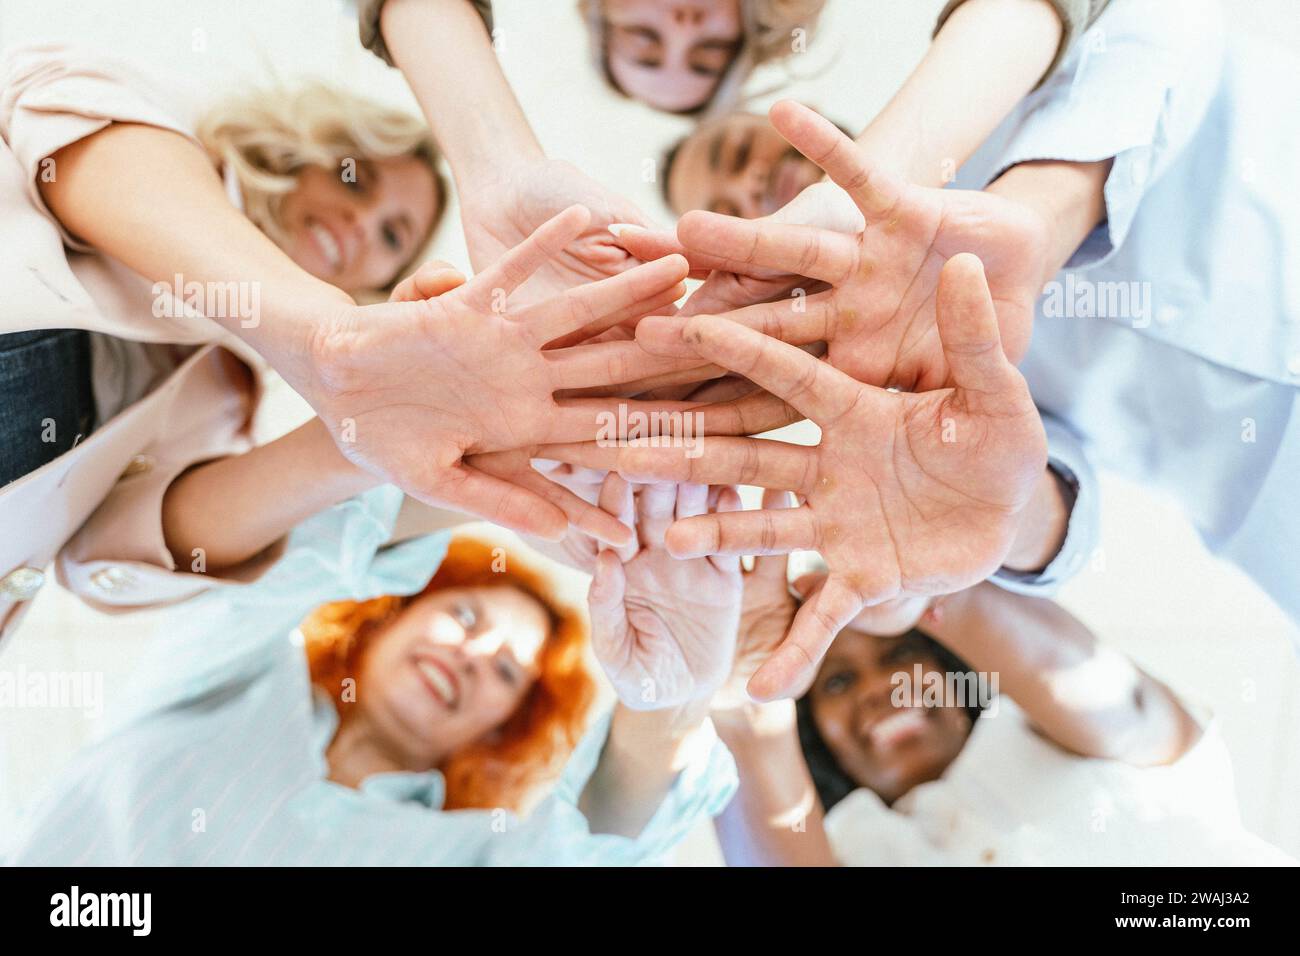 Diverse business people putting their hands together showing unity and support. Business and teamwork concept. Stock Photo